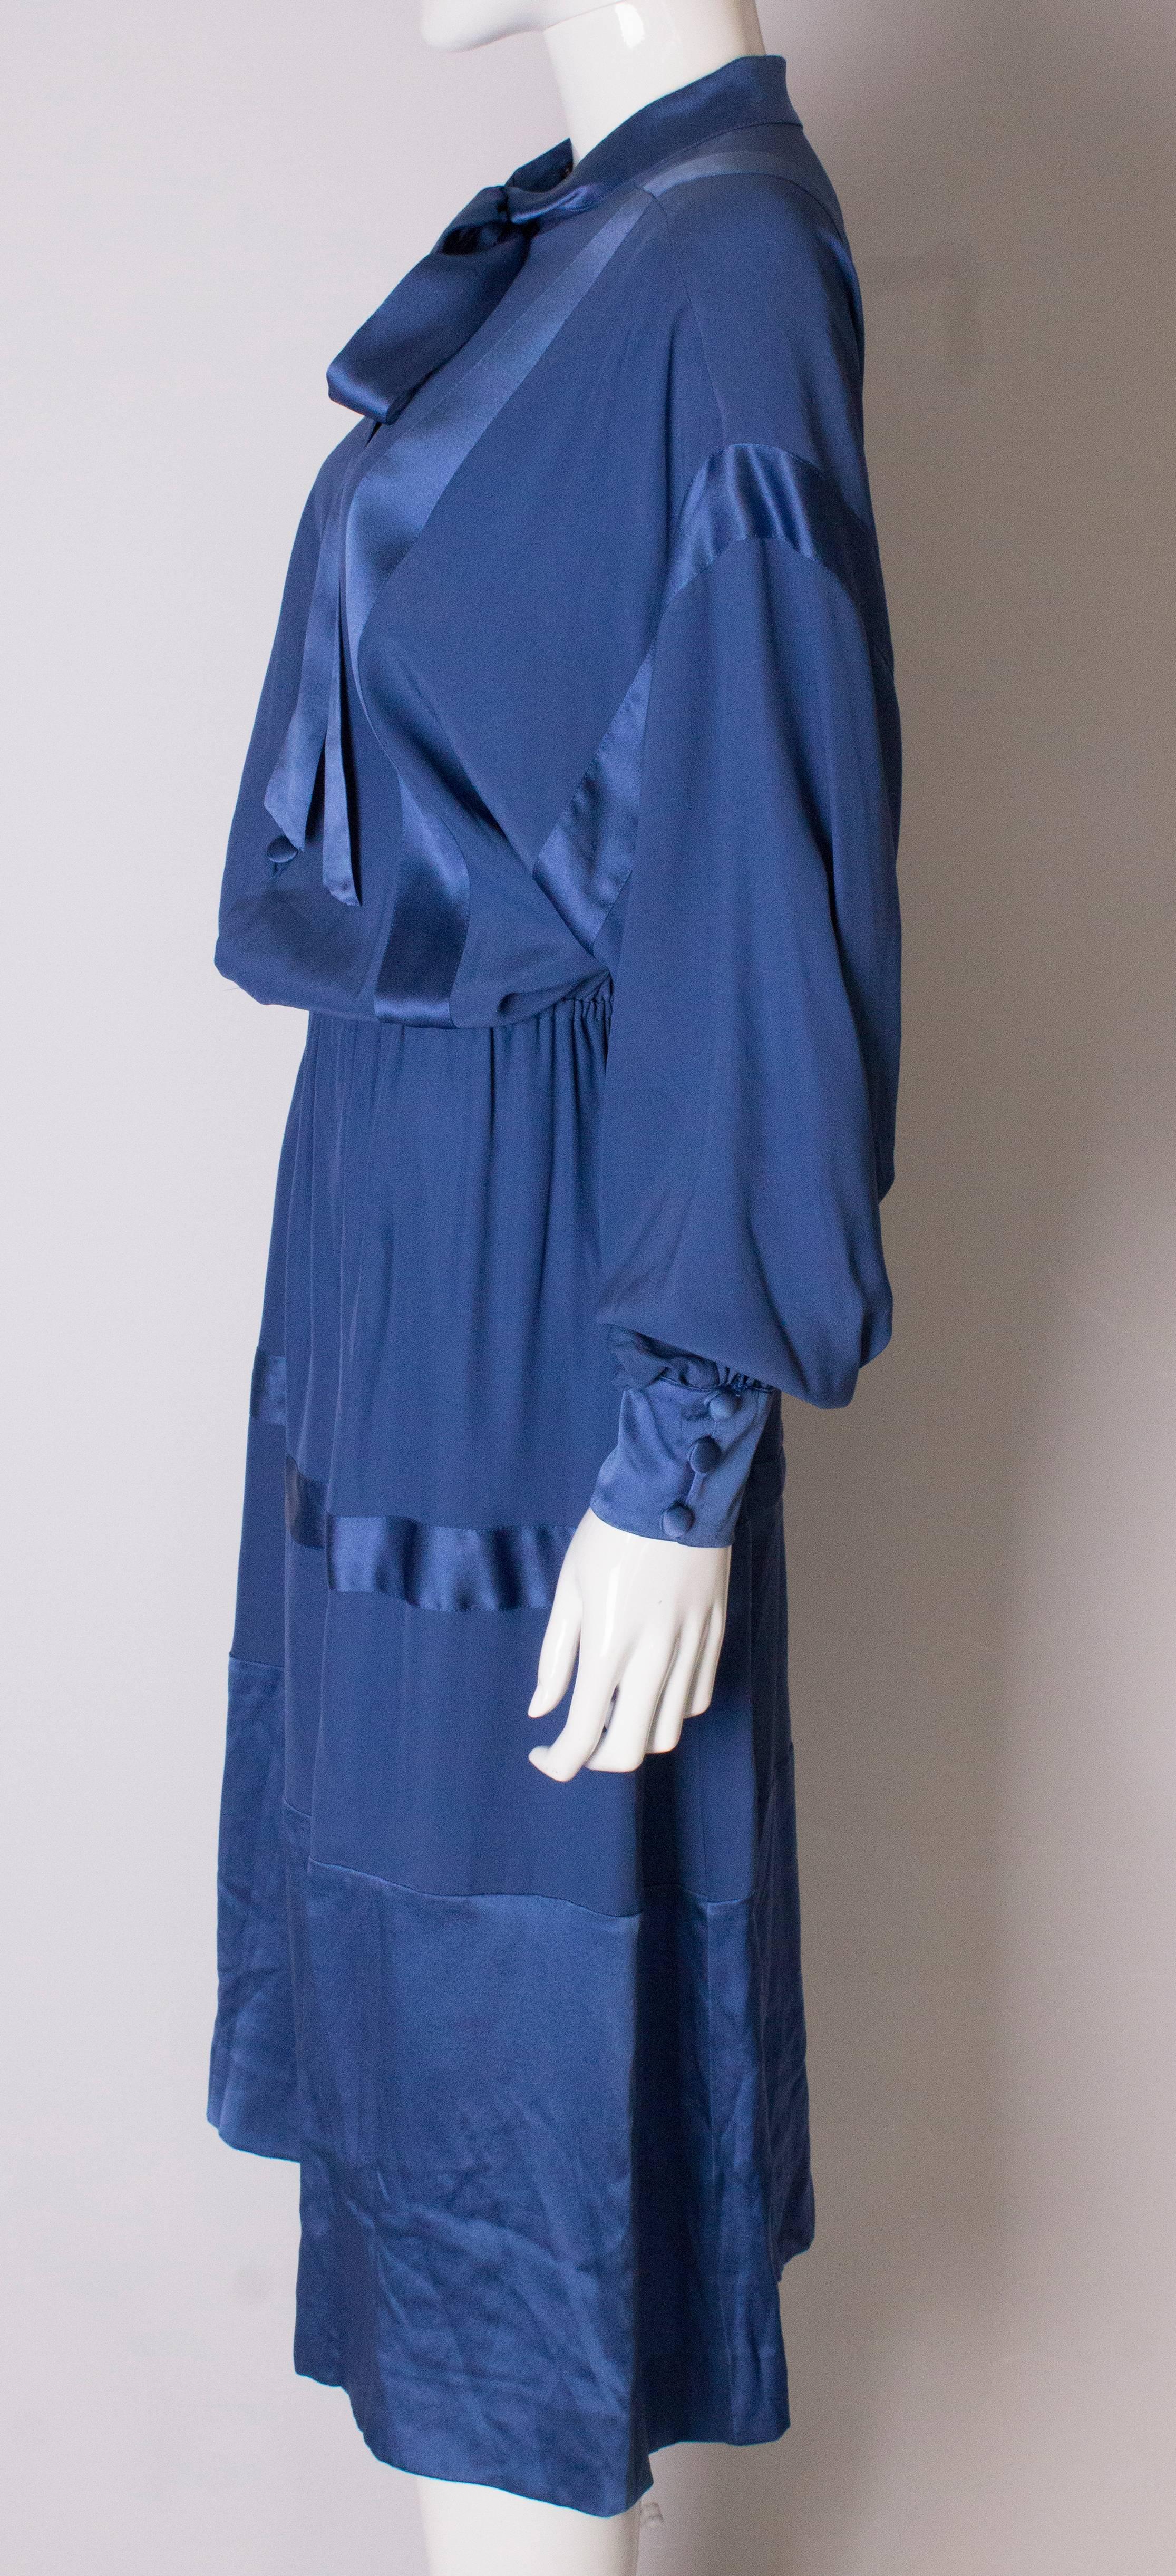 Purple A Vintage 1970s  blue Silk Dress by Stefano Ricci for Herbie Frogg For Sale